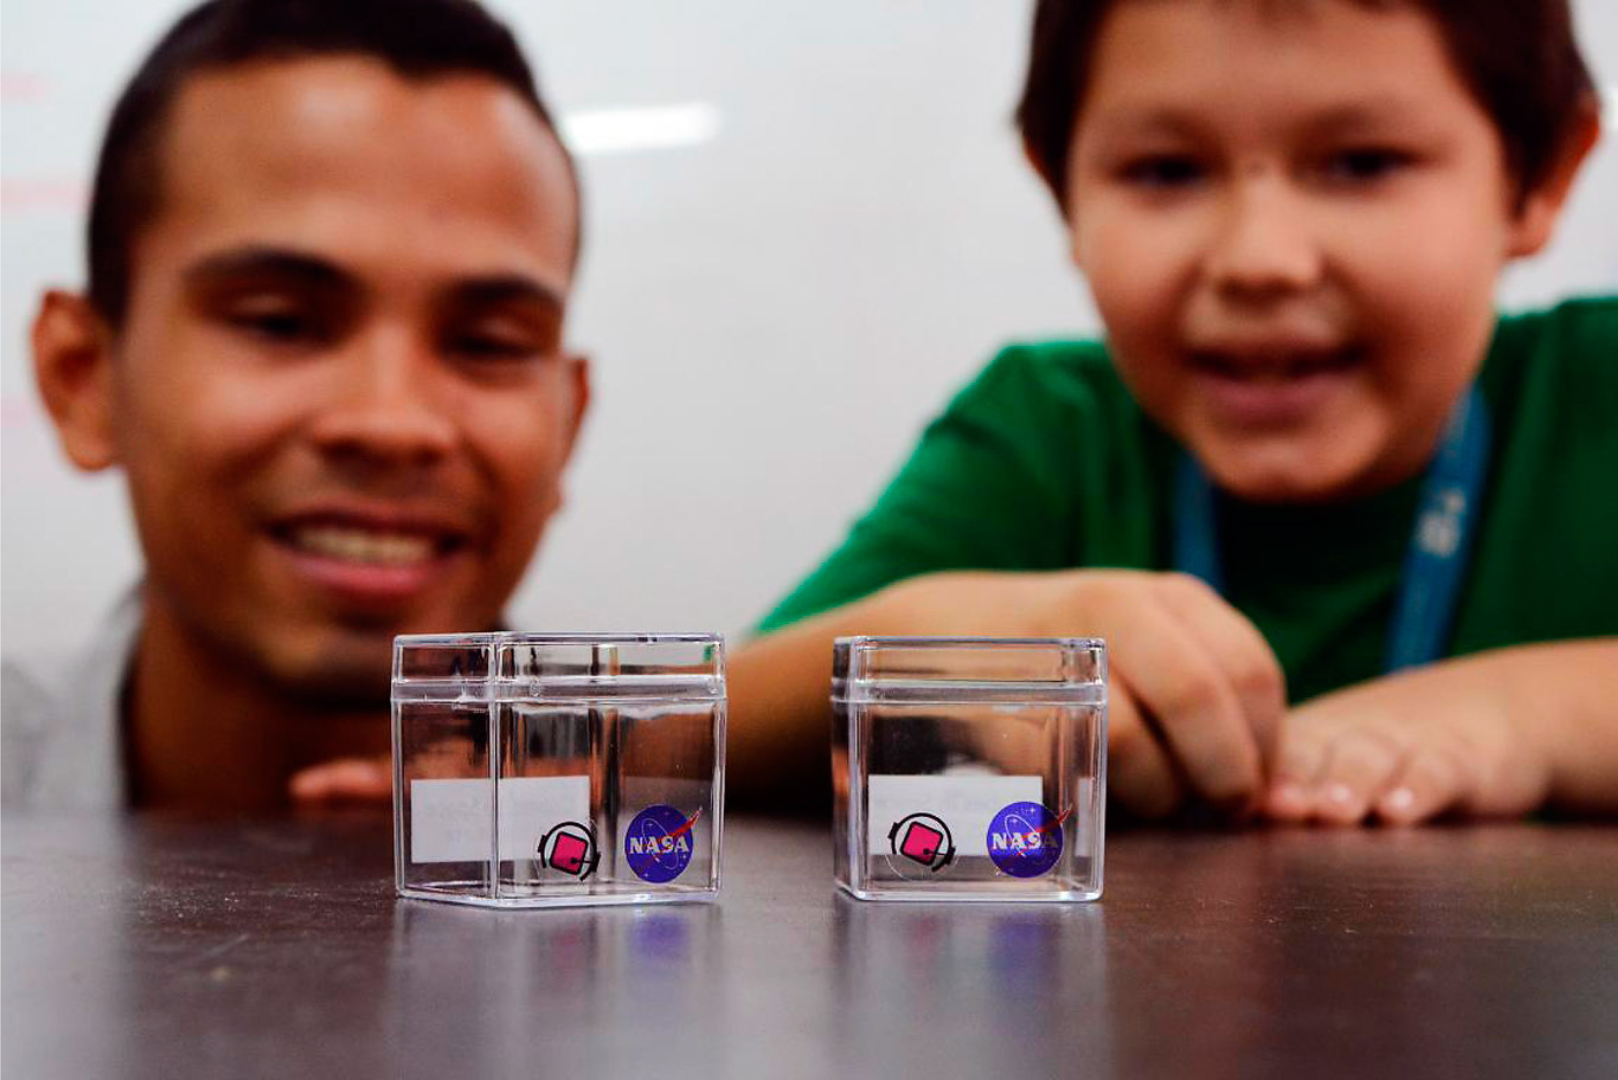 An adult and child are smiling at two clear plastic cube shaped containers that will hold student experiments